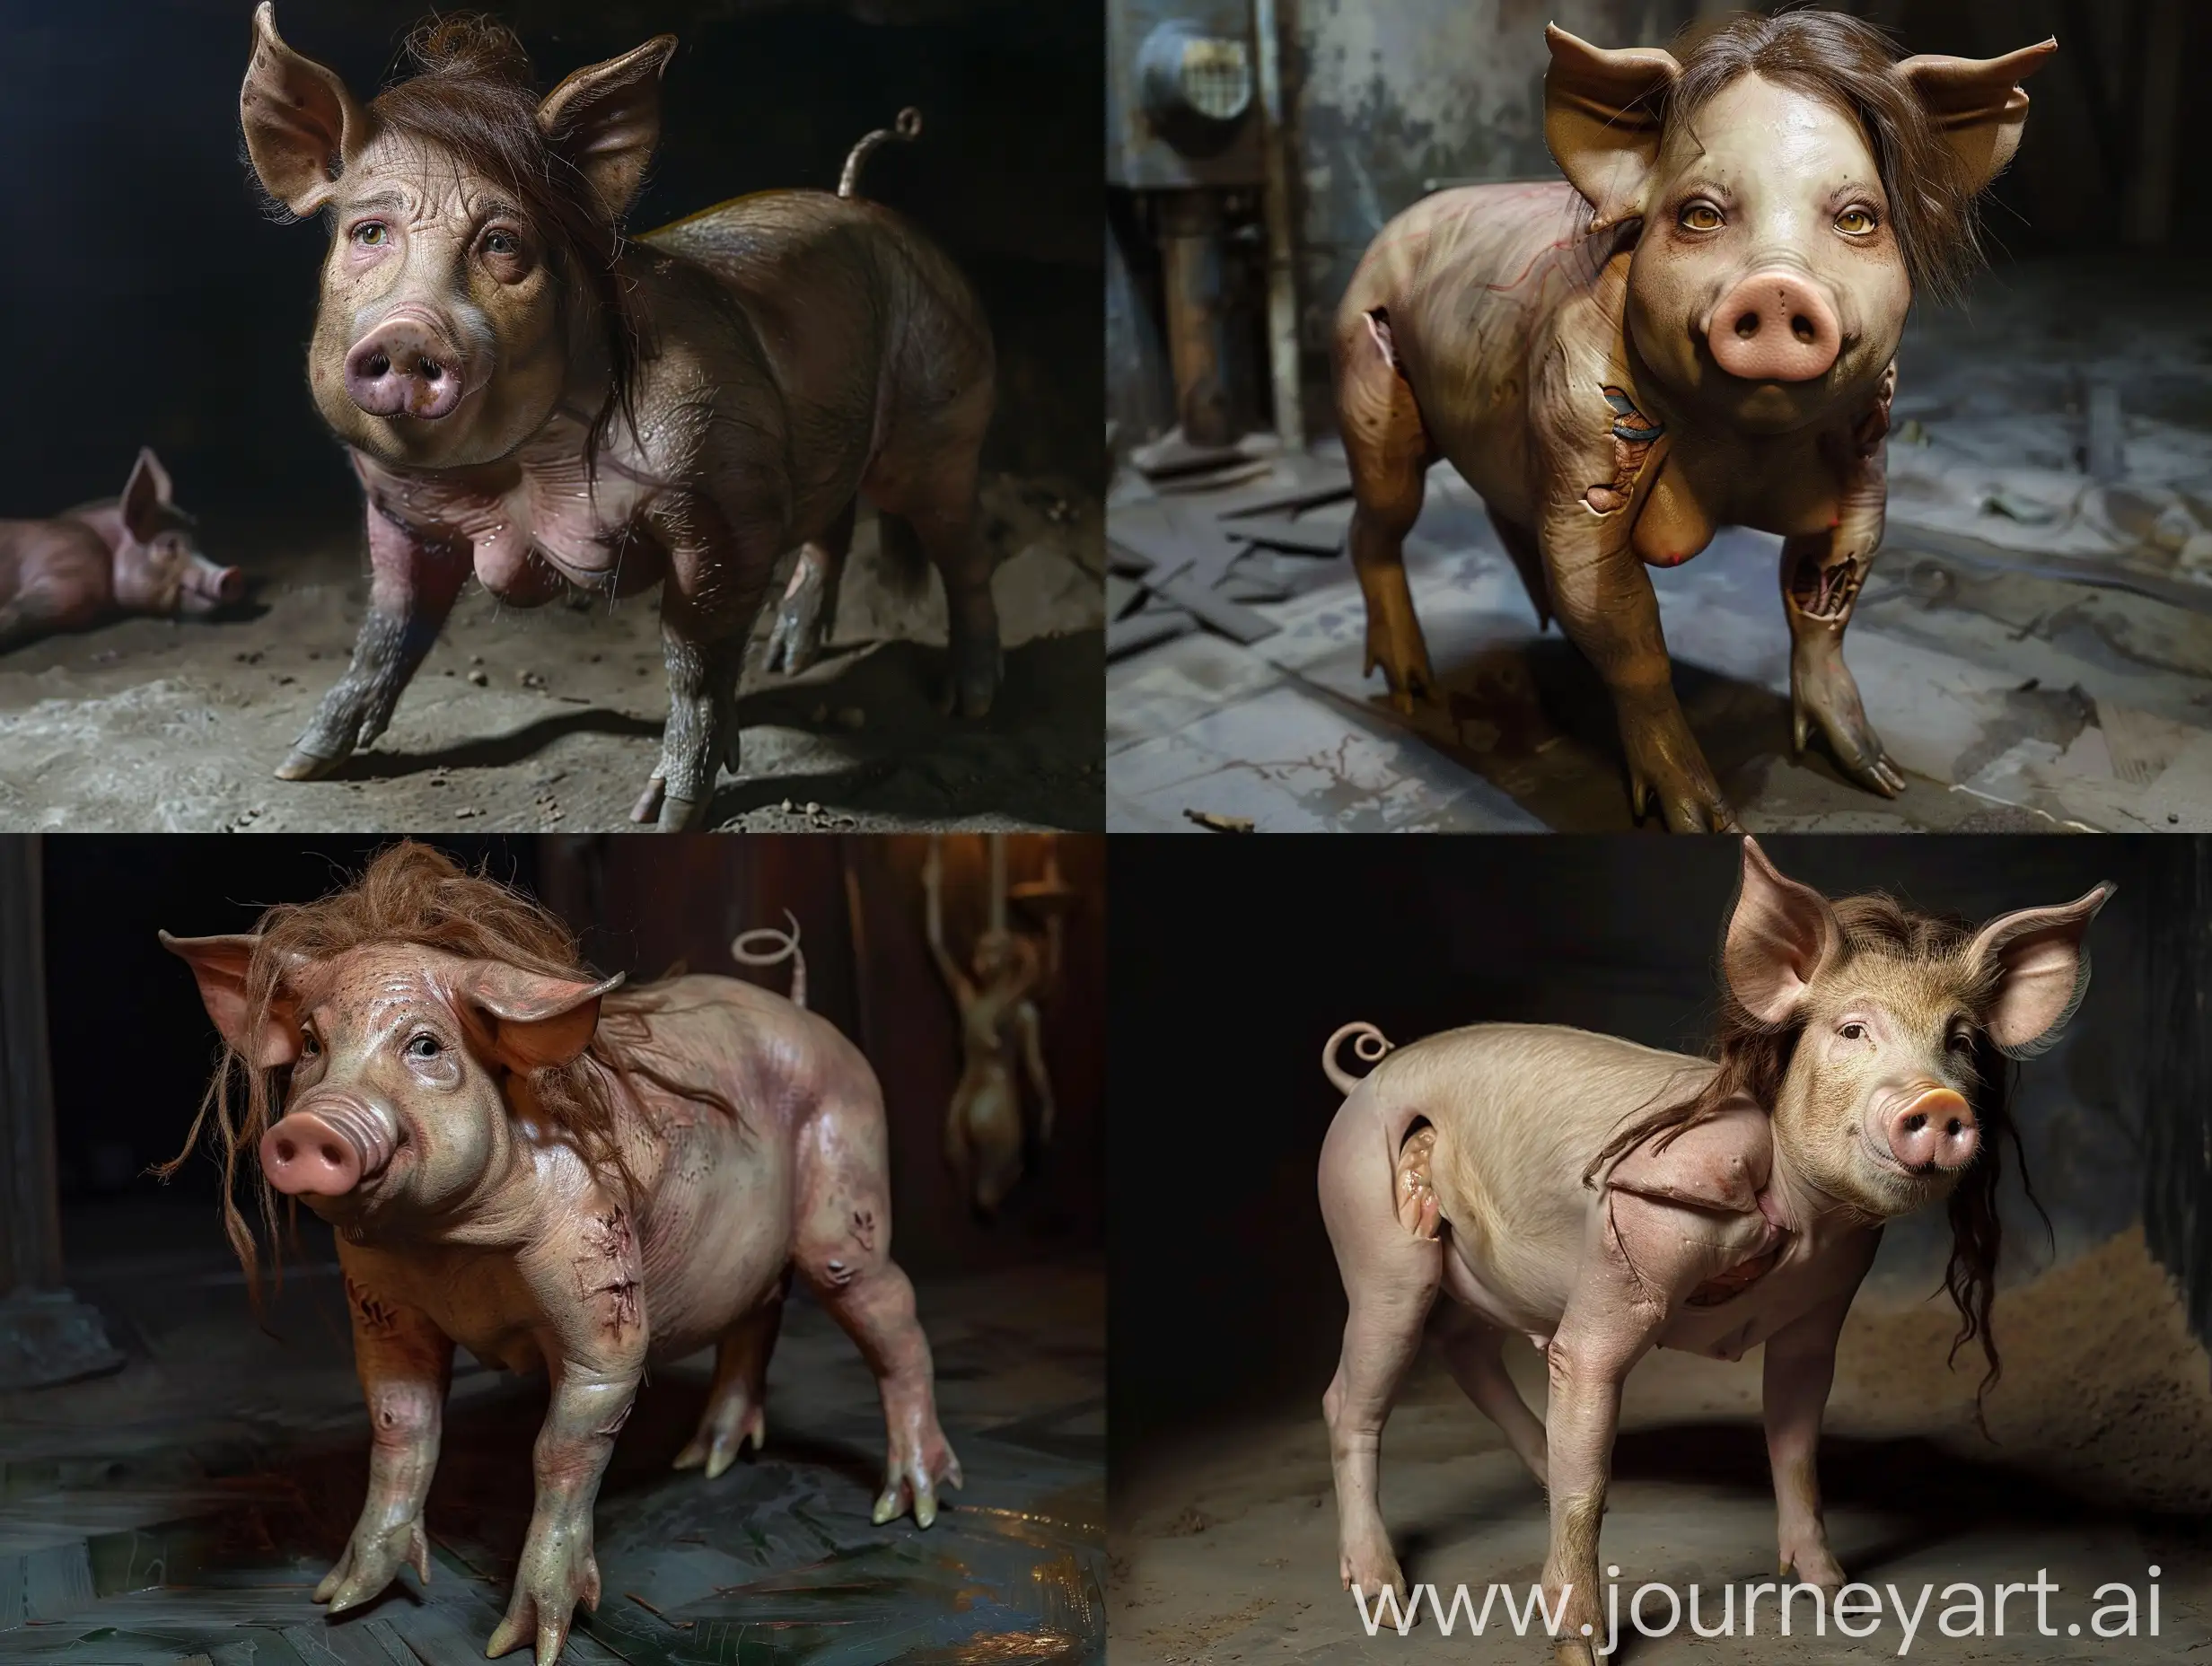 A pig. She has loose brown hair, a human face and a chest. She has ears, hooves, a snout and a tail. She is standing on all fours in a chamber at night. She has hooves for feet. Realistic photograph, full body picture.